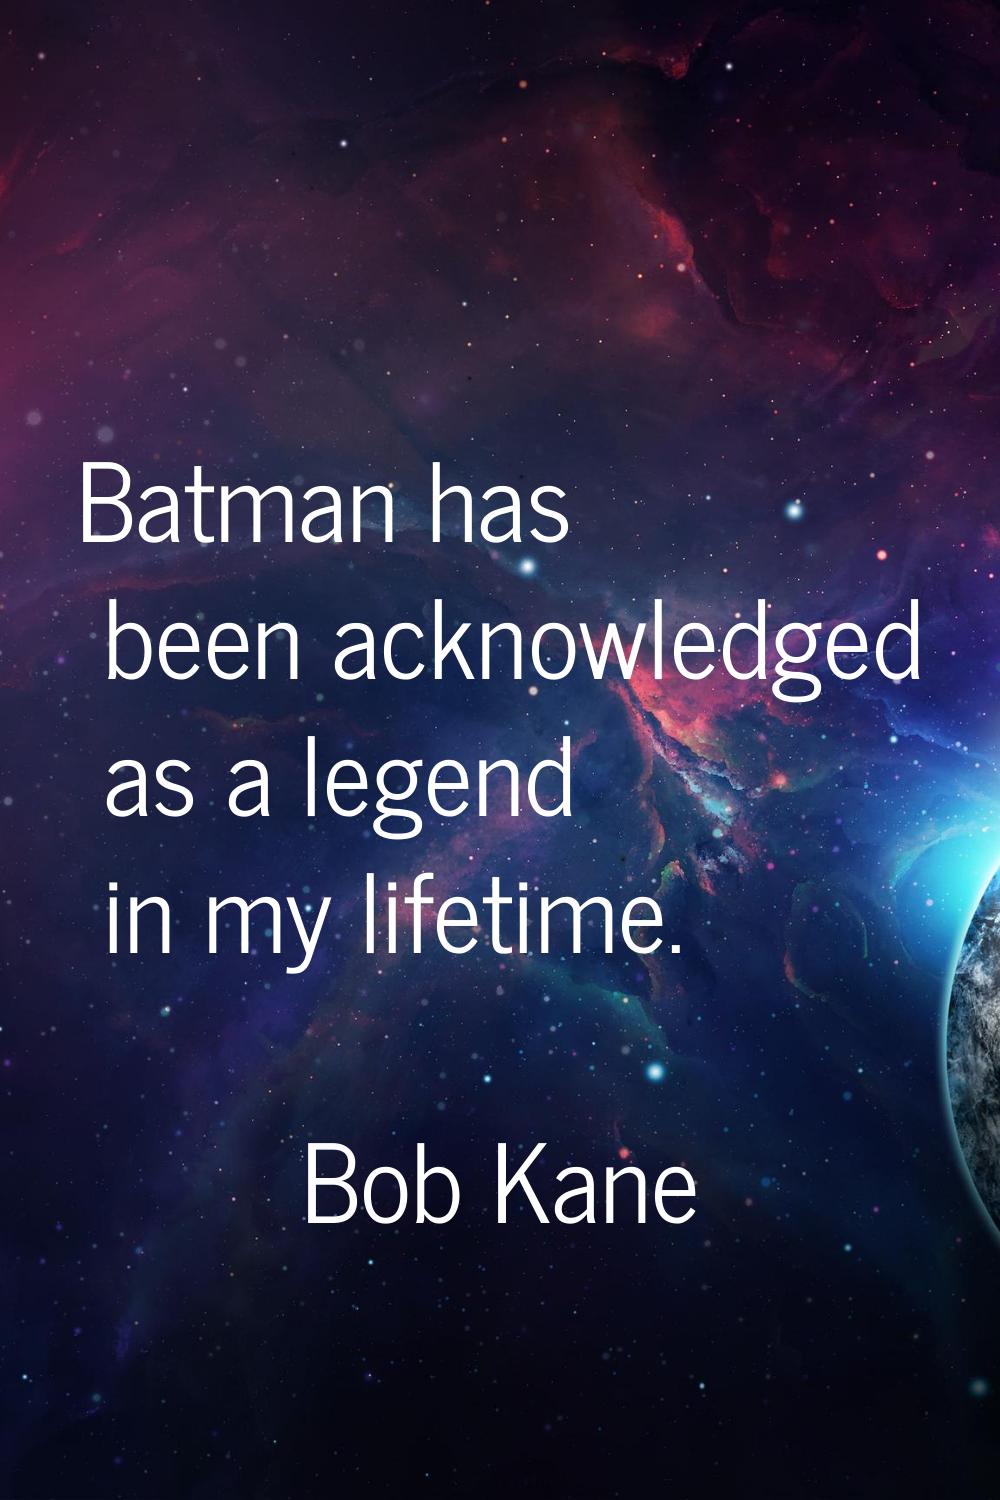 Batman has been acknowledged as a legend in my lifetime.